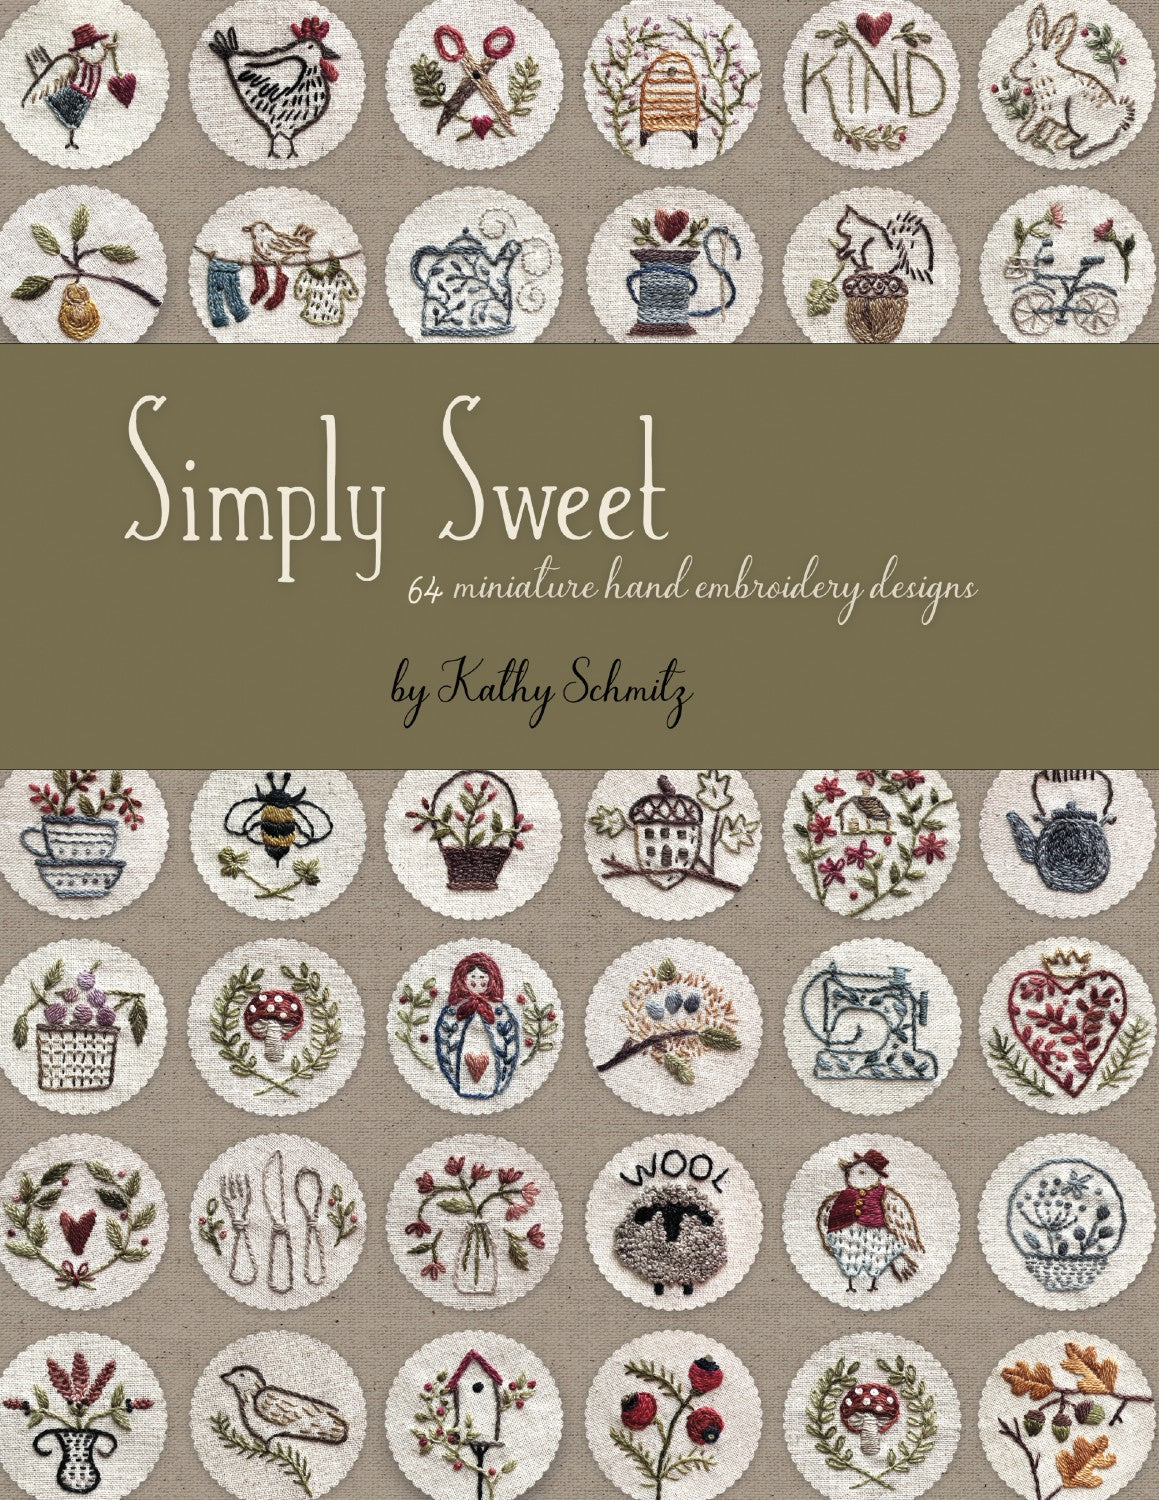 Simply Sweet 64 Miniature Hand Embroidery Designs Book by Kathy Schmitz